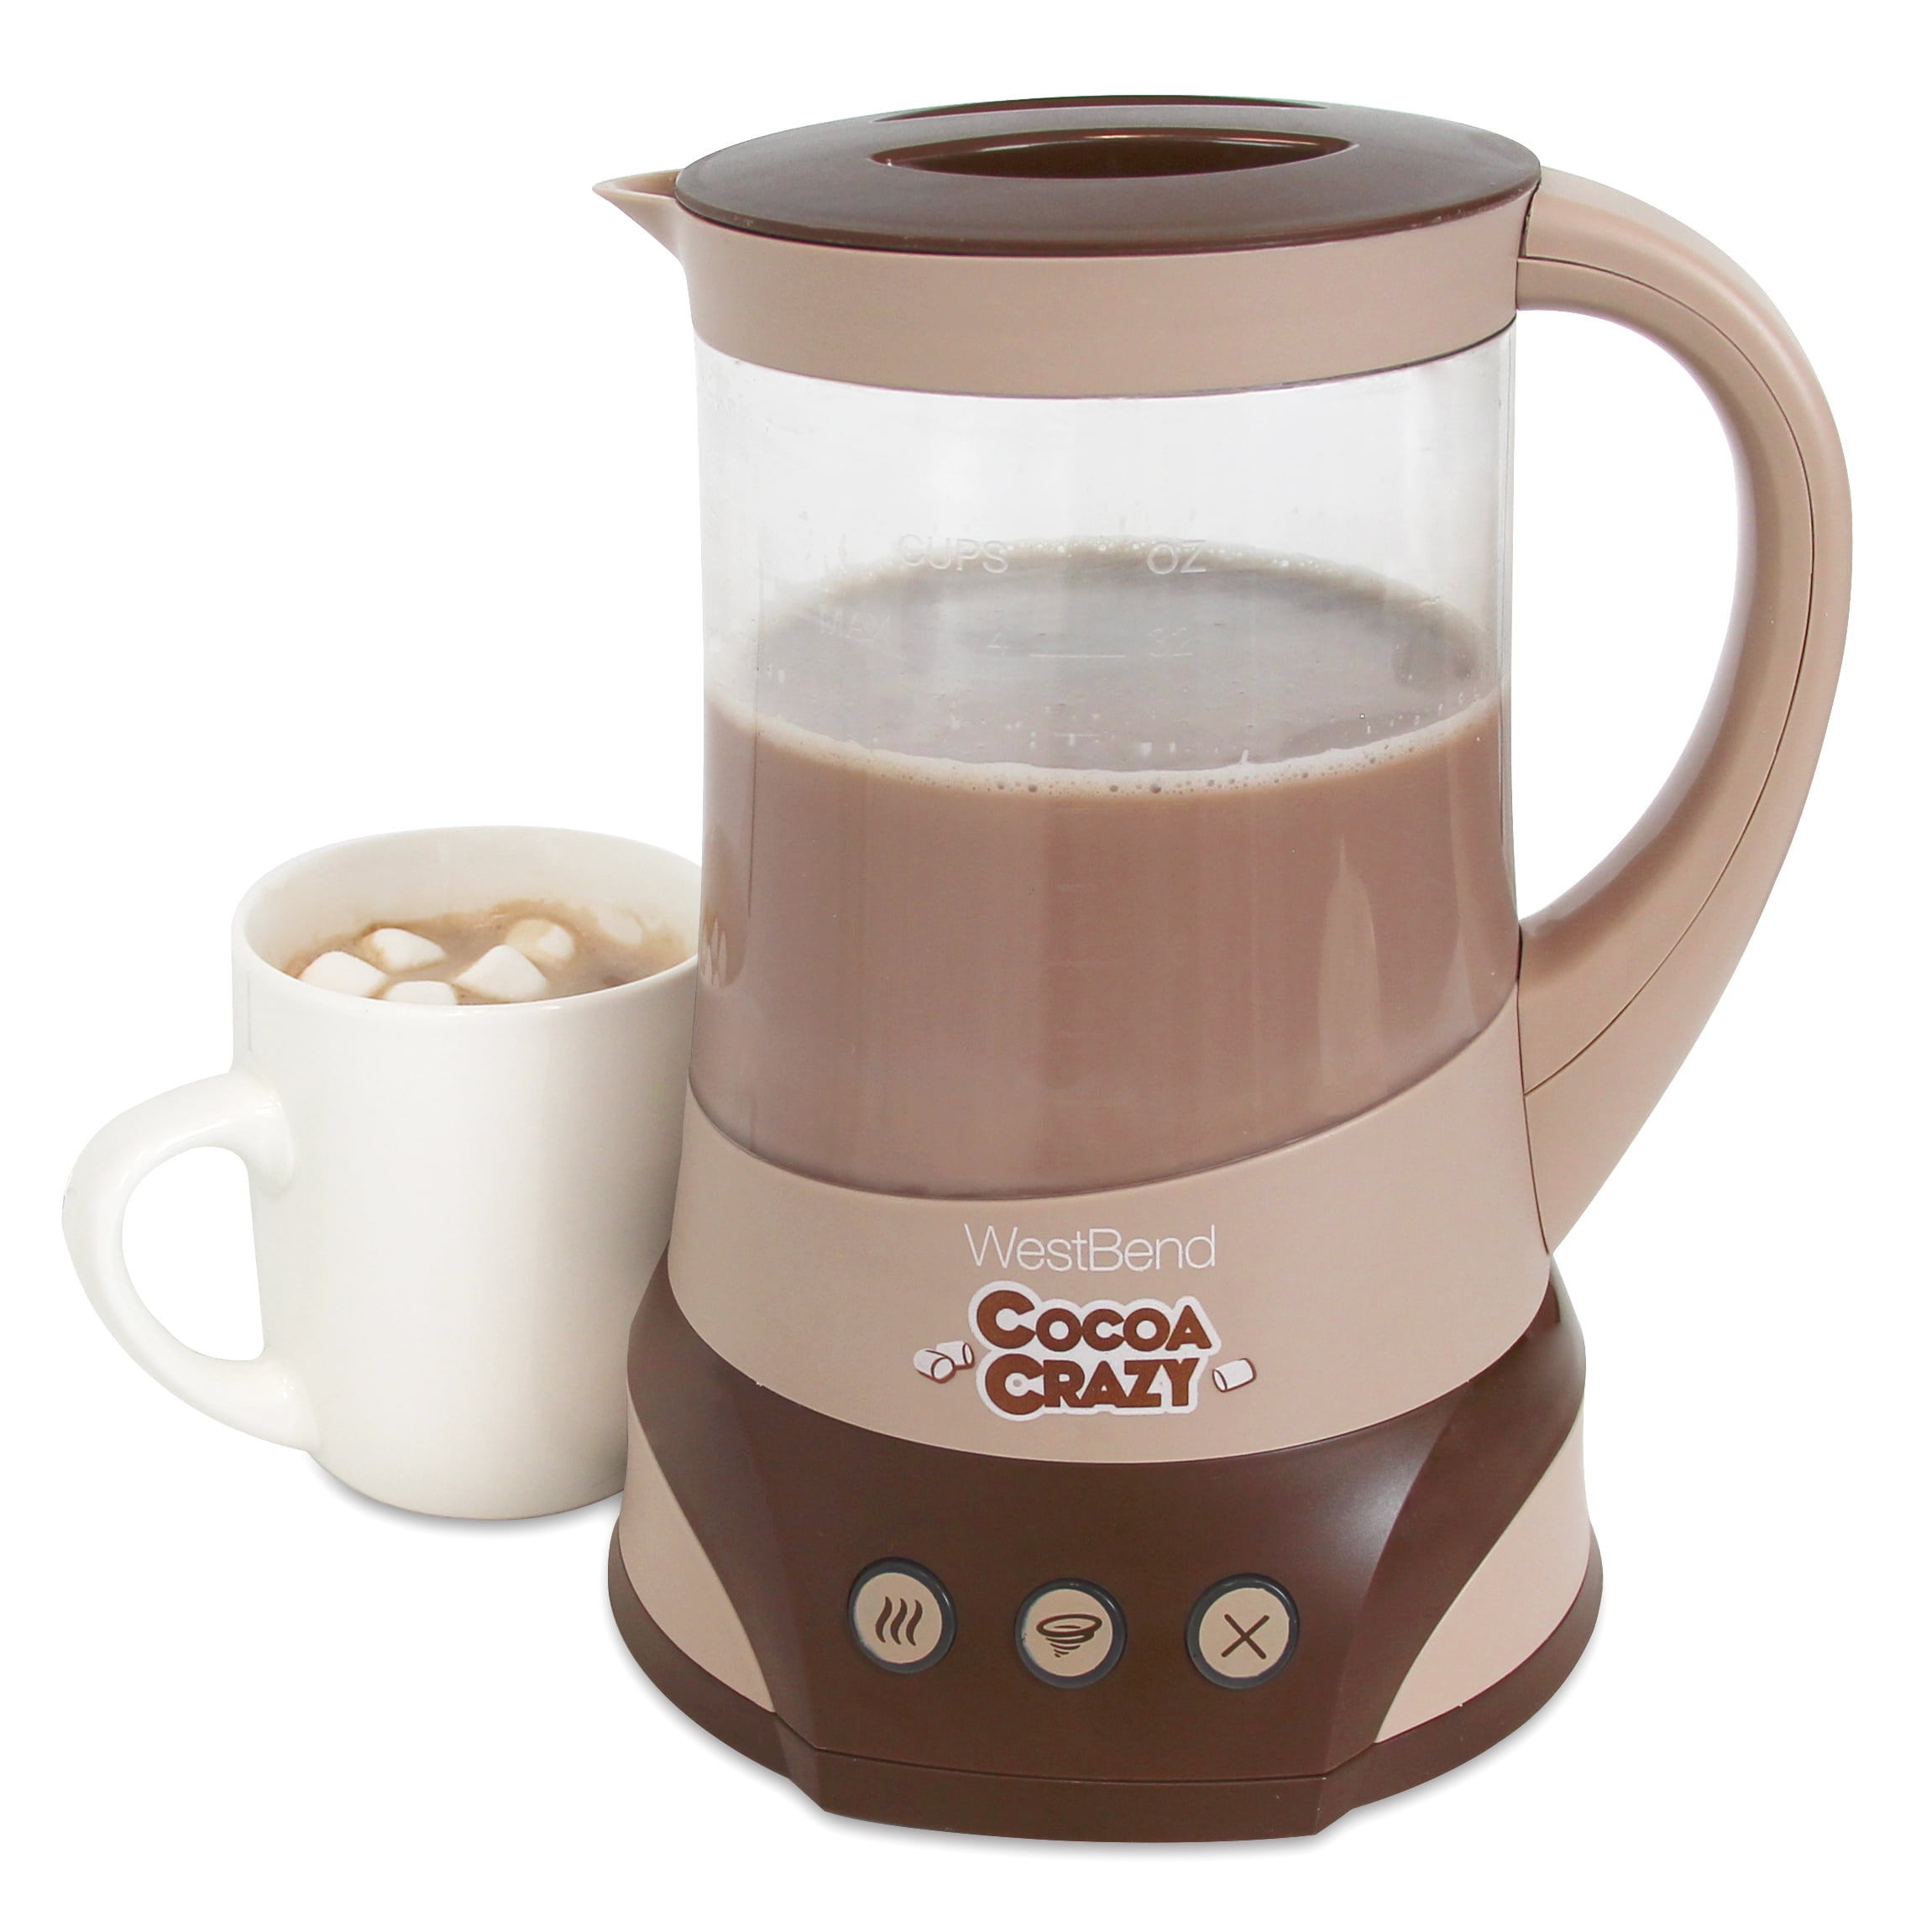 West Bend CL50032 32-Ounce Cocoa Crazy Hot Chocolate Maker, Brown